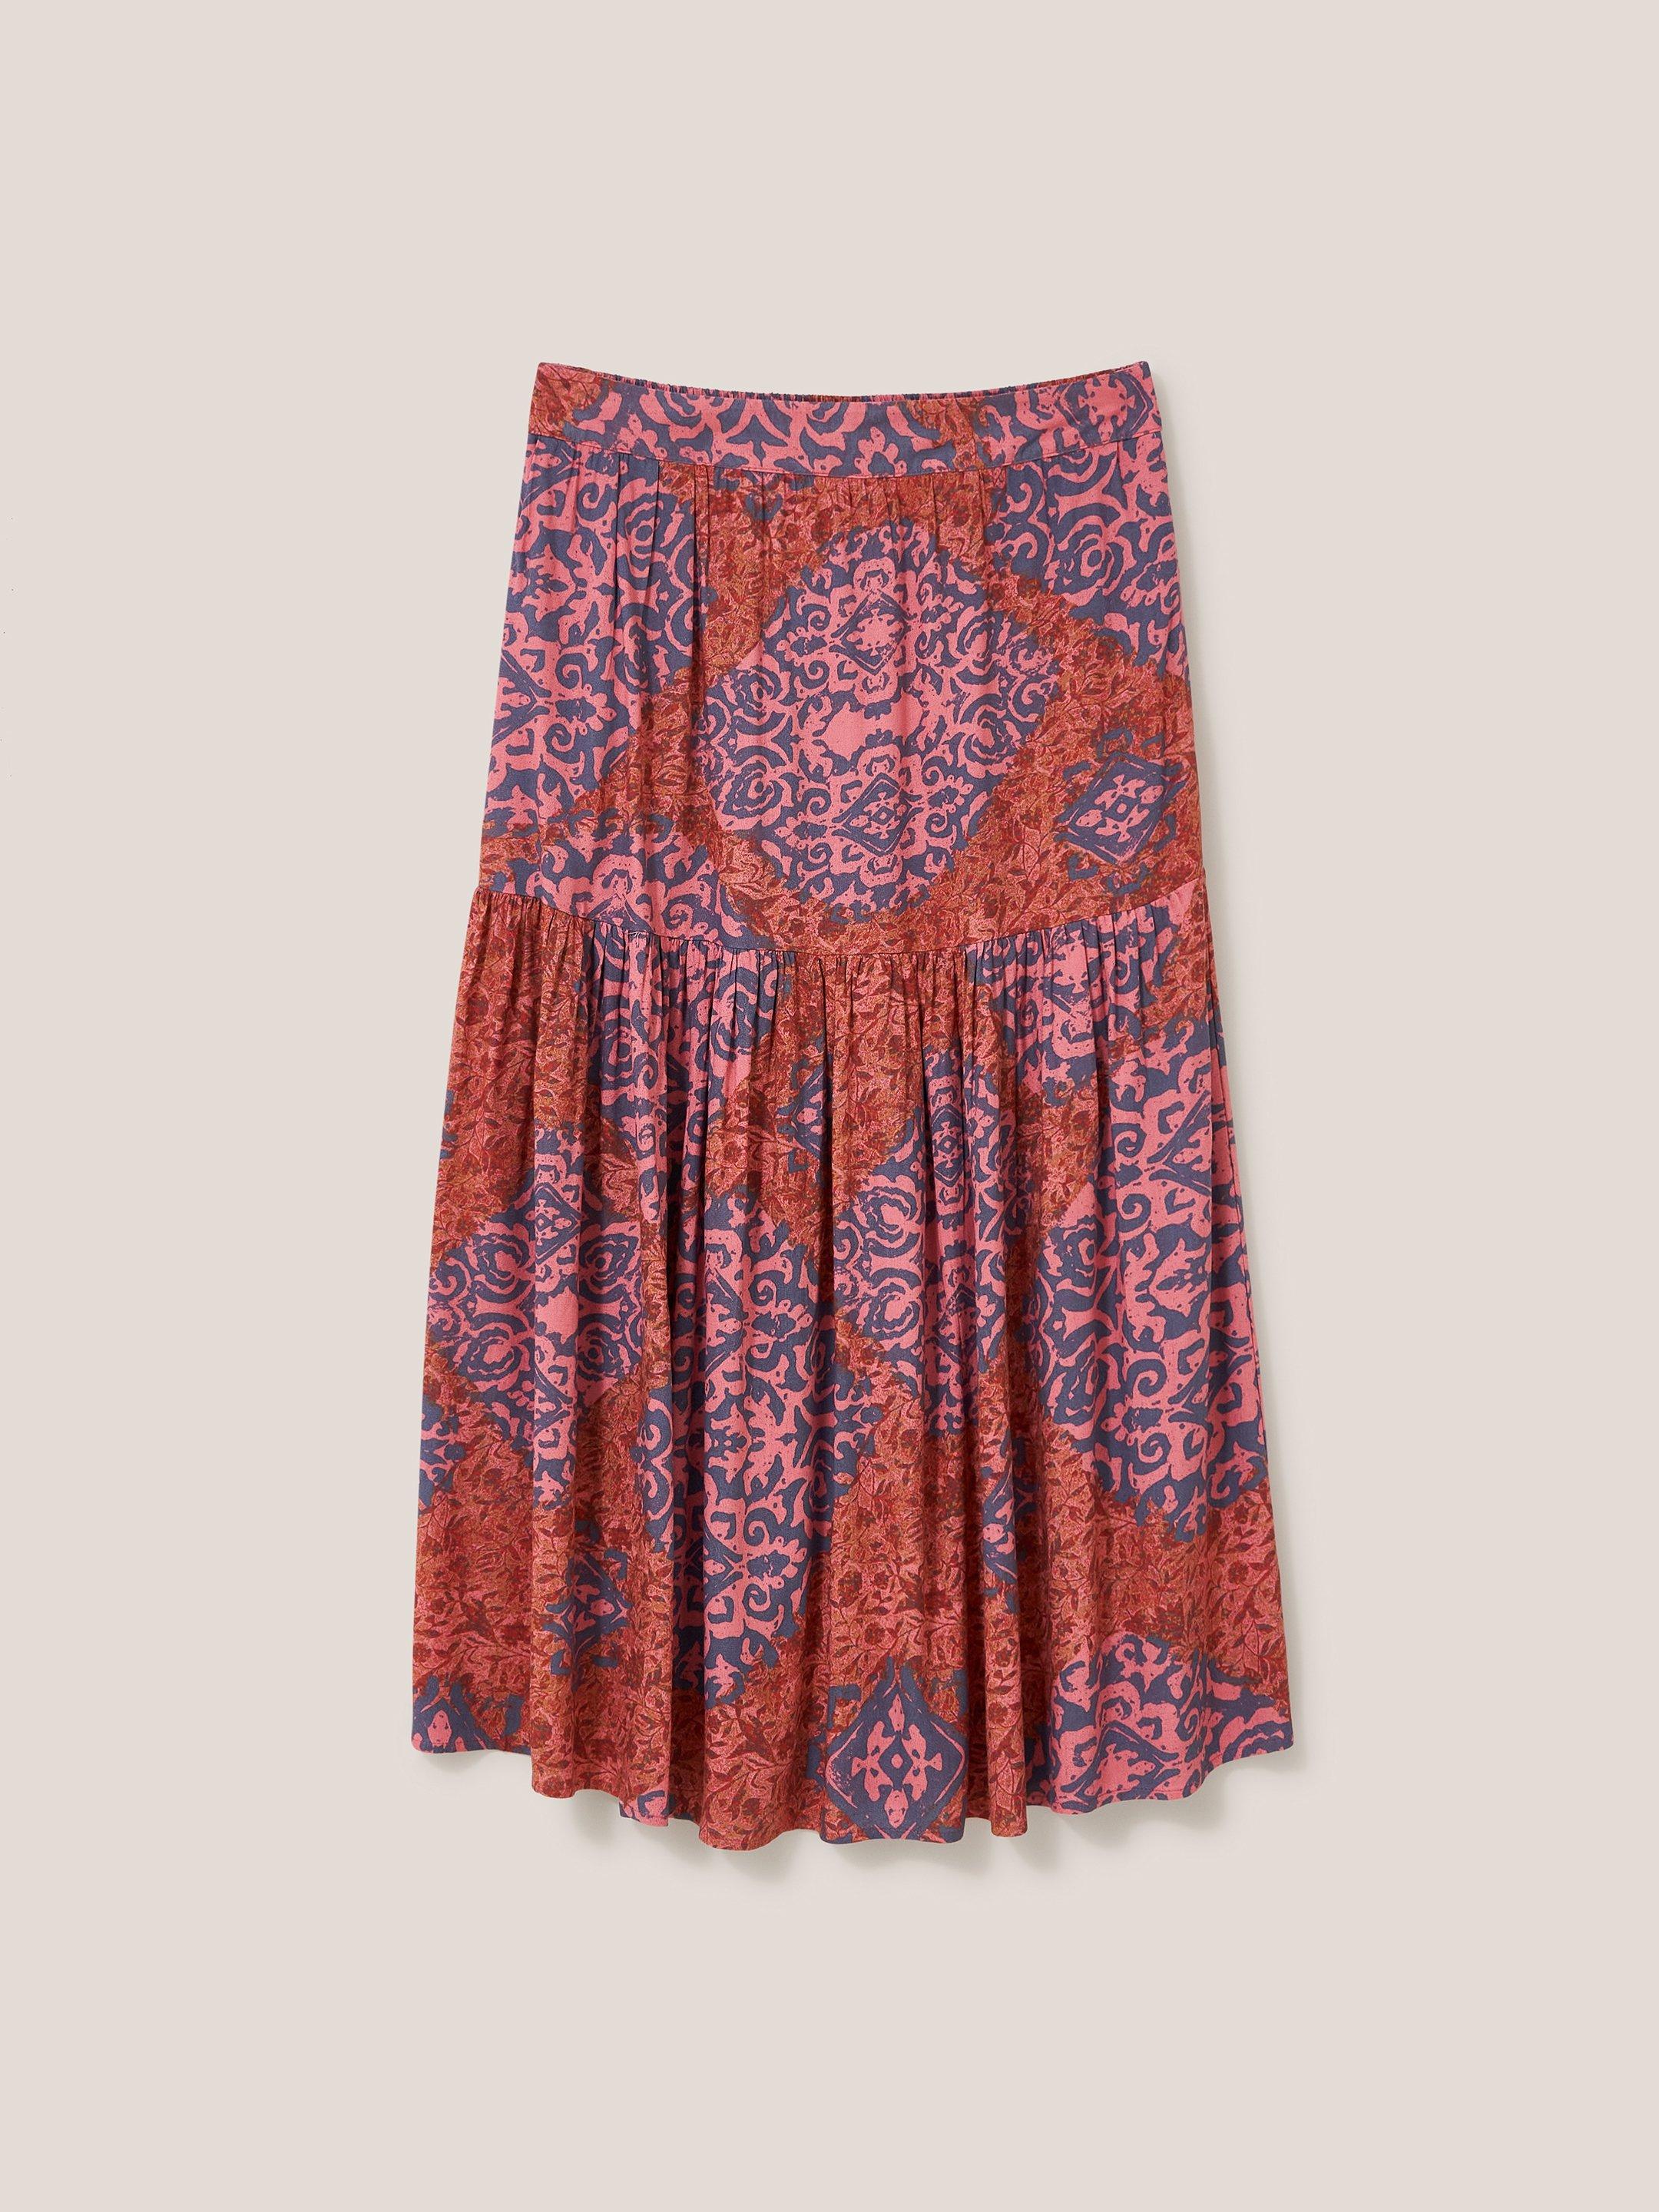 Jamima Eco Vero Midi Skirt in RED MLT - FLAT FRONT